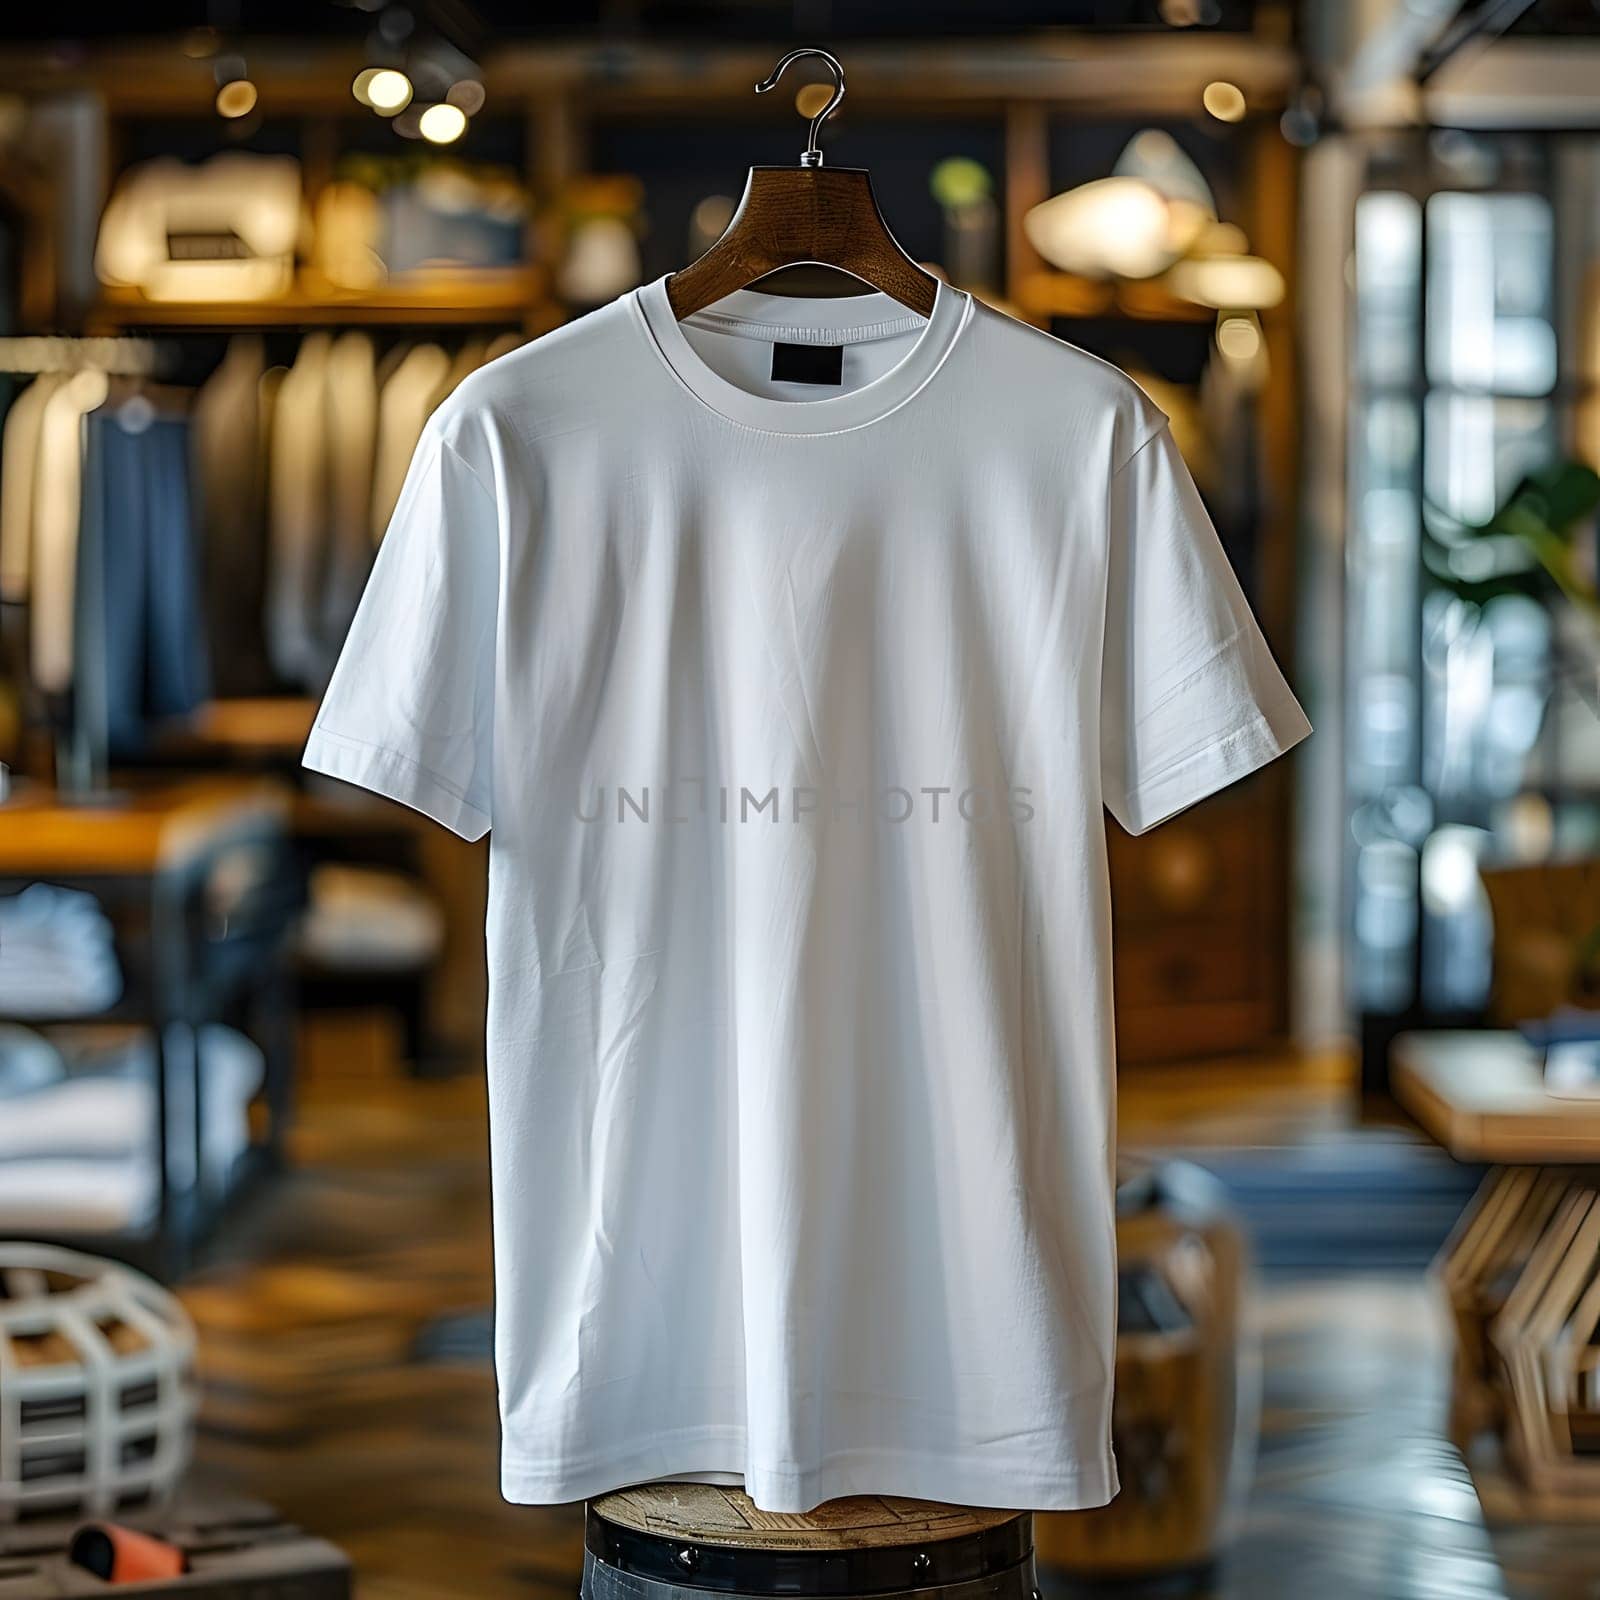 A white tshirt with short sleeves and a collar is neatly hanging on a clothes hanger in a fashion store, showcasing its sportswear jersey design